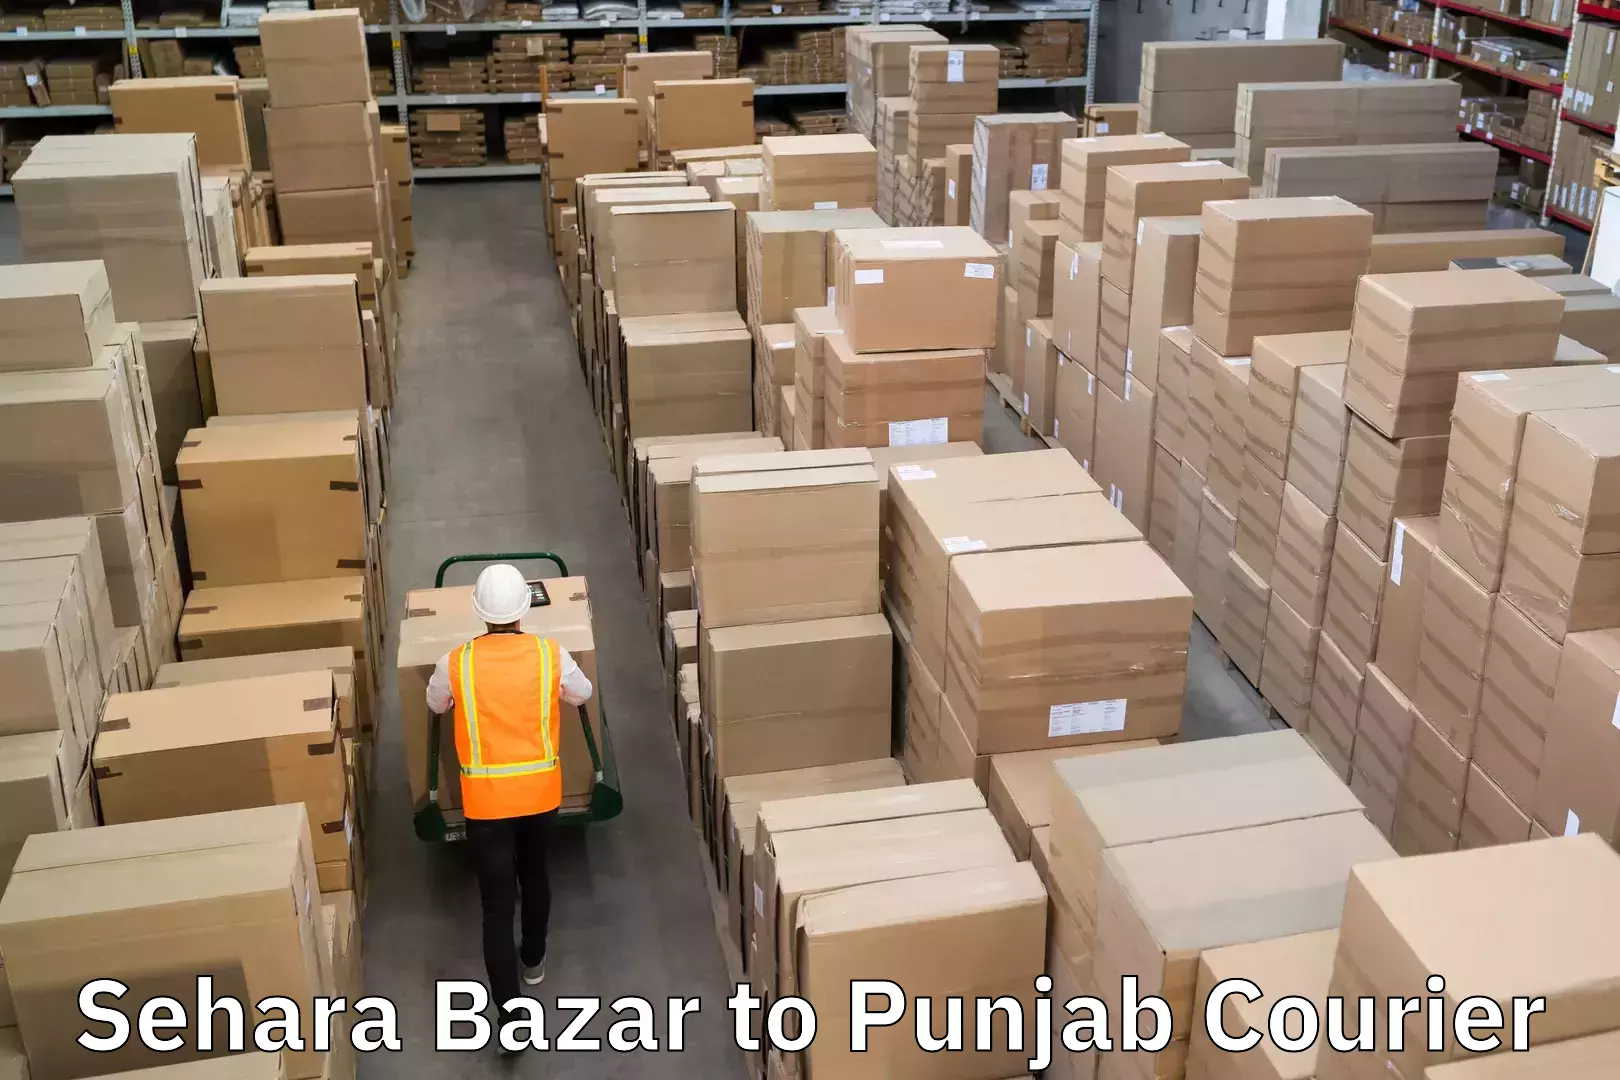 Round-the-clock parcel delivery Sehara Bazar to Punjab